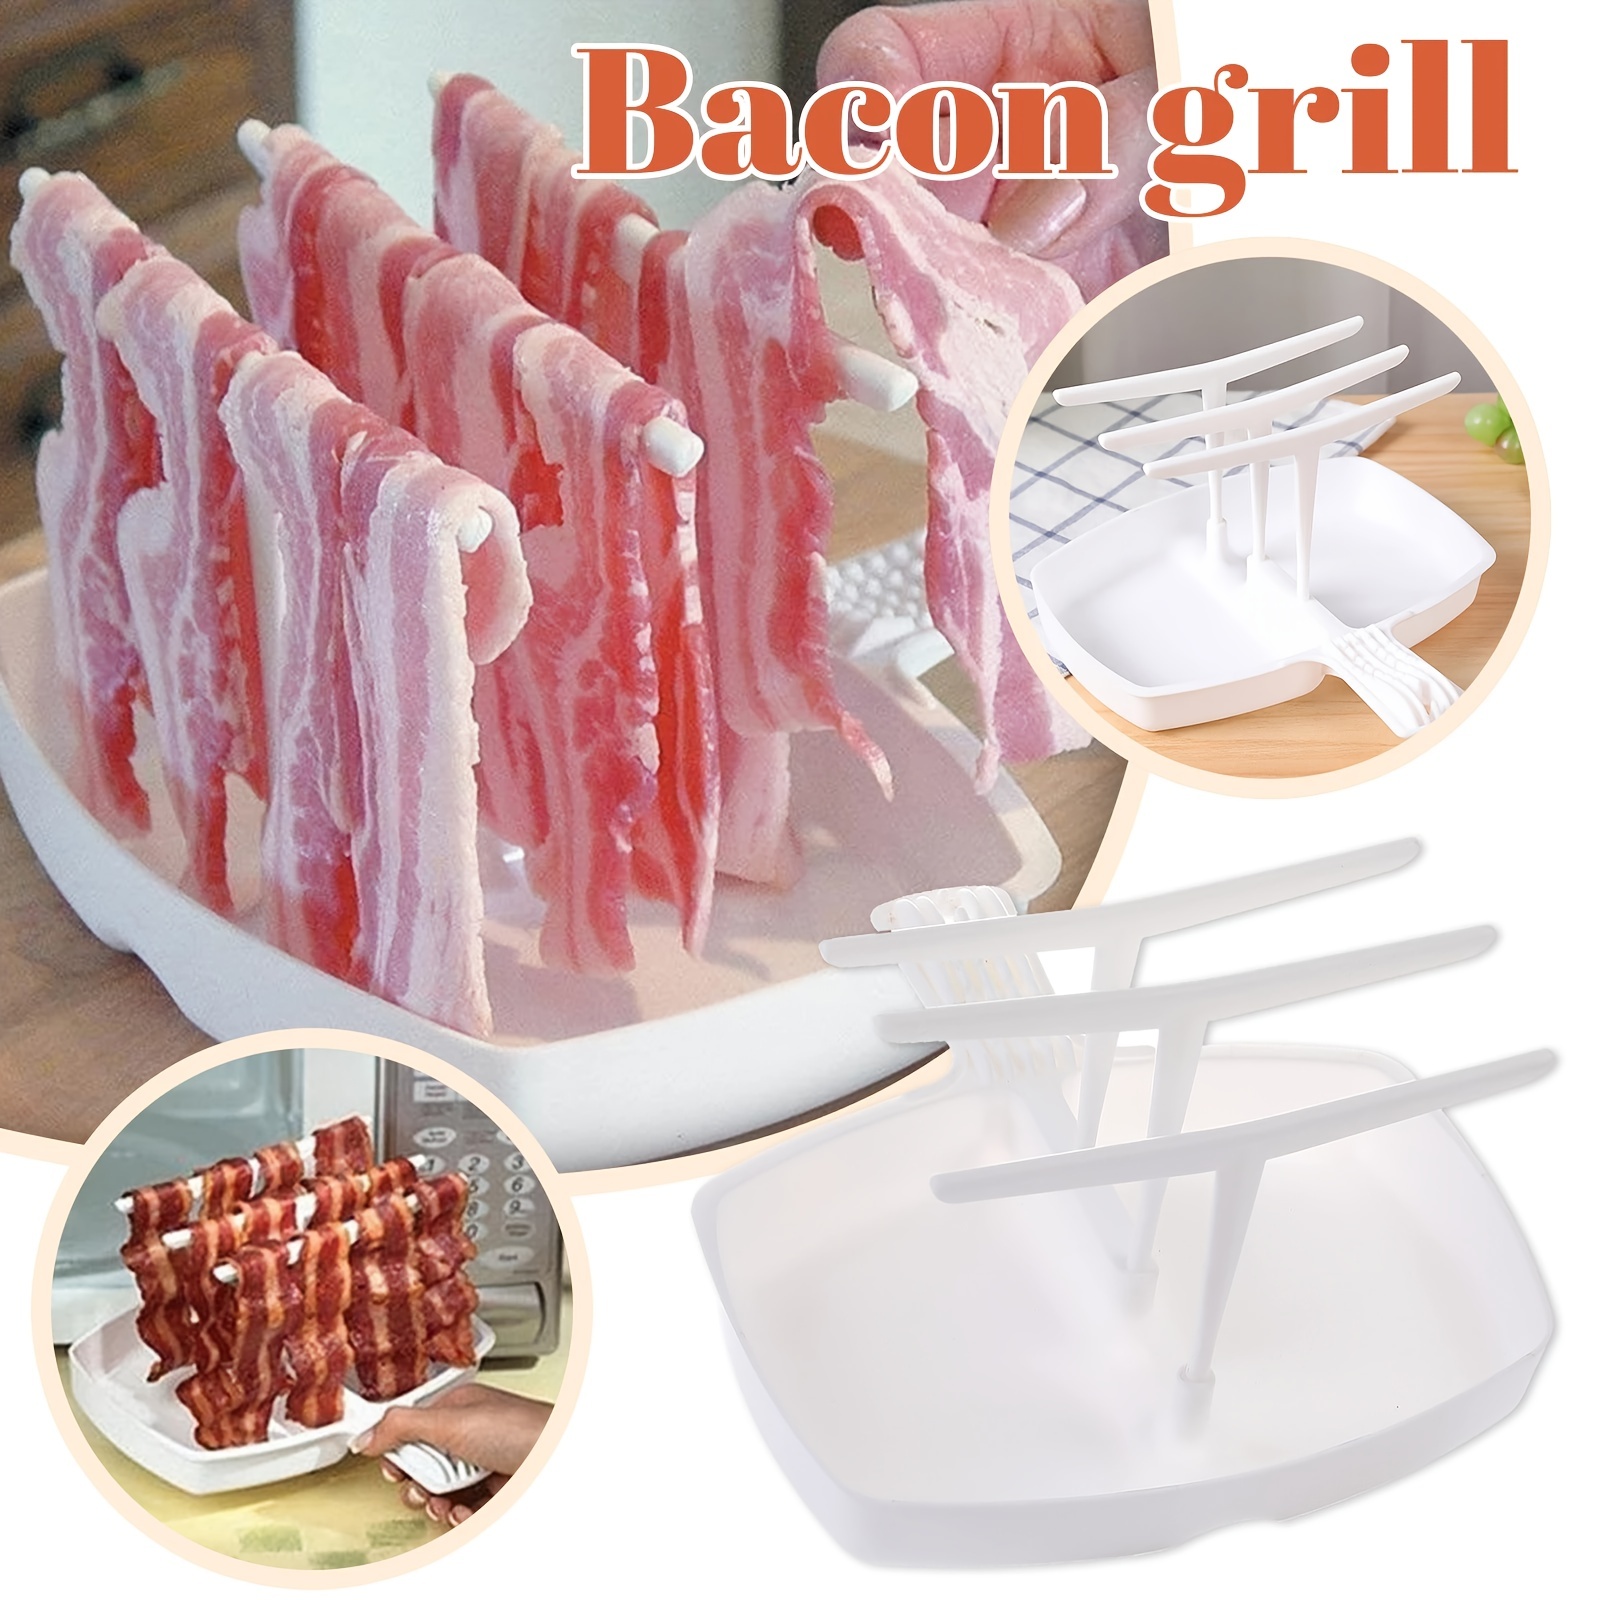 2 Pieces Microwave Bacon Tray Microwave Bacon Cooker Grill Rack Piratical  Baking Oven Tray for Frozen Snacks, Frozen Pizza Cooking Supplies, Grey